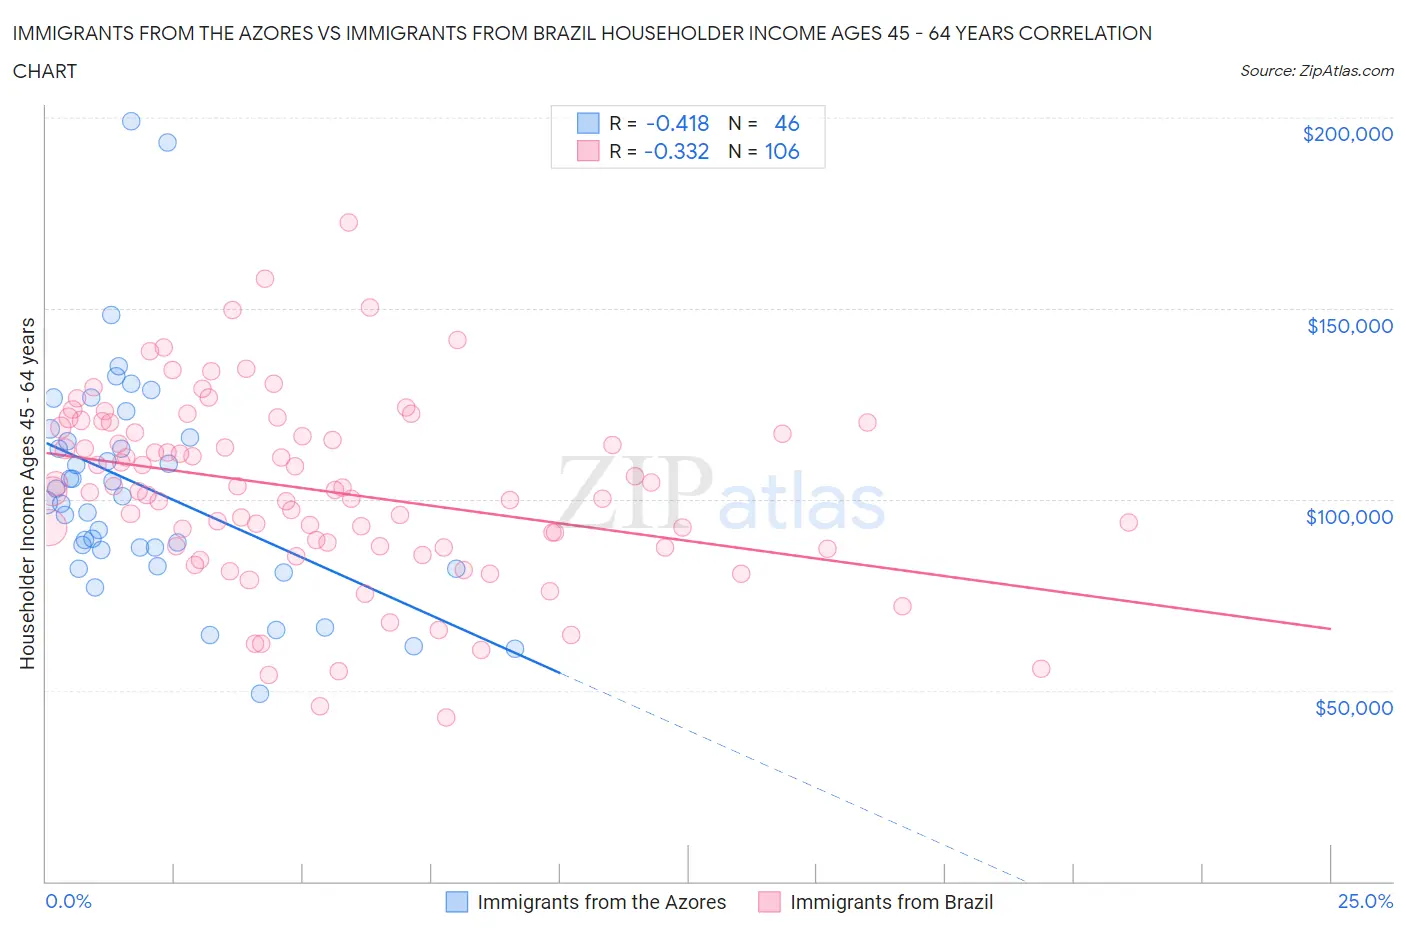 Immigrants from the Azores vs Immigrants from Brazil Householder Income Ages 45 - 64 years